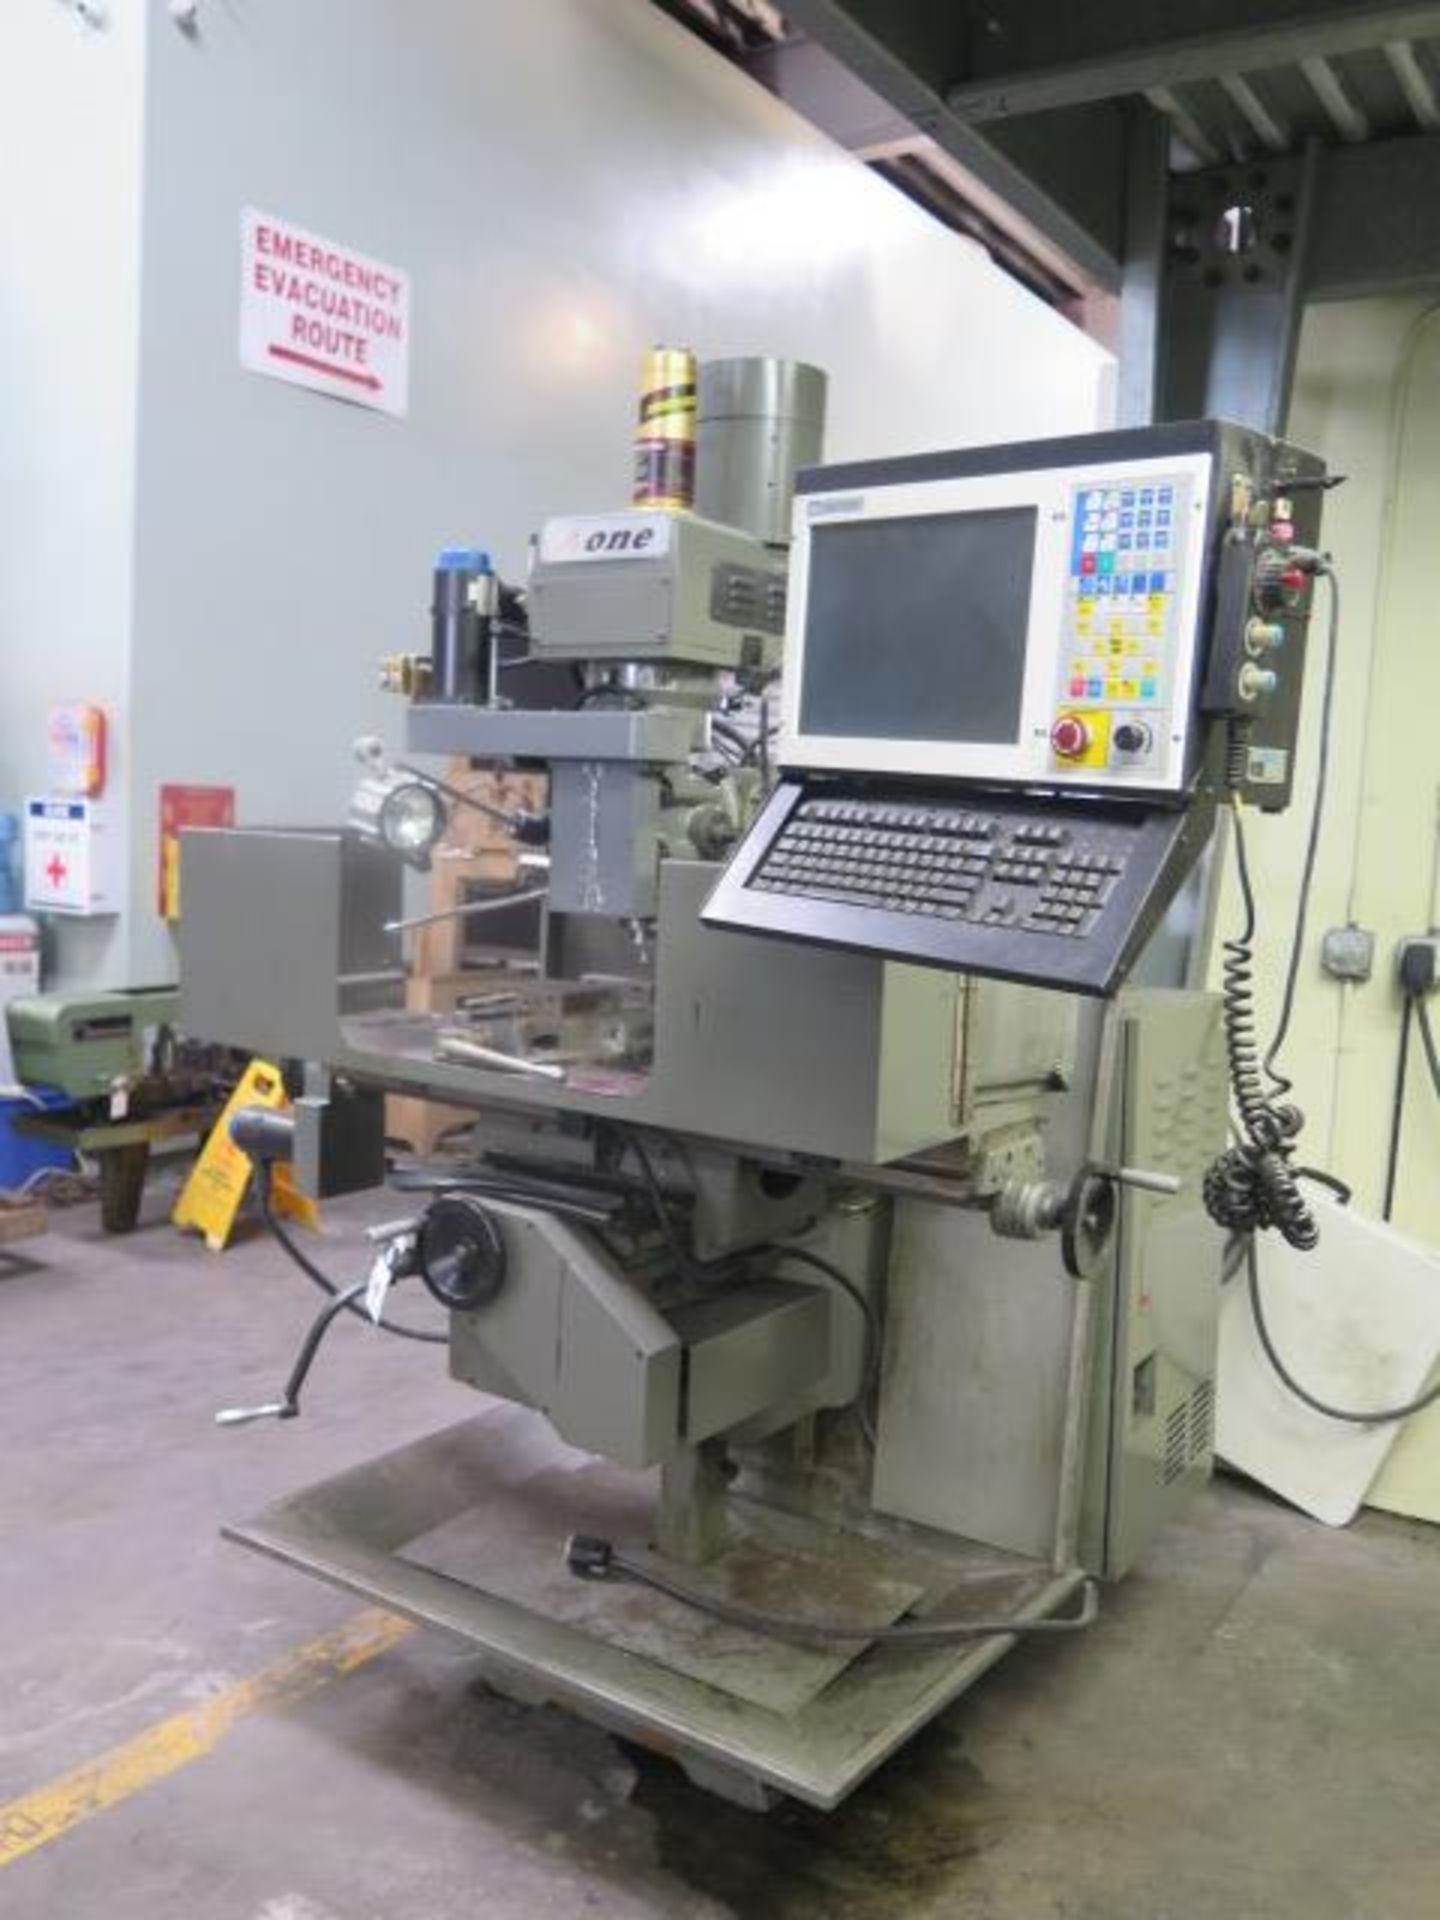 2006 Atrump “A One” 3VK WVERTER 3-Axis CNC Vertical Mill s/n 95041 w/ Centroid Controls, Hand Wheel, - Image 3 of 12